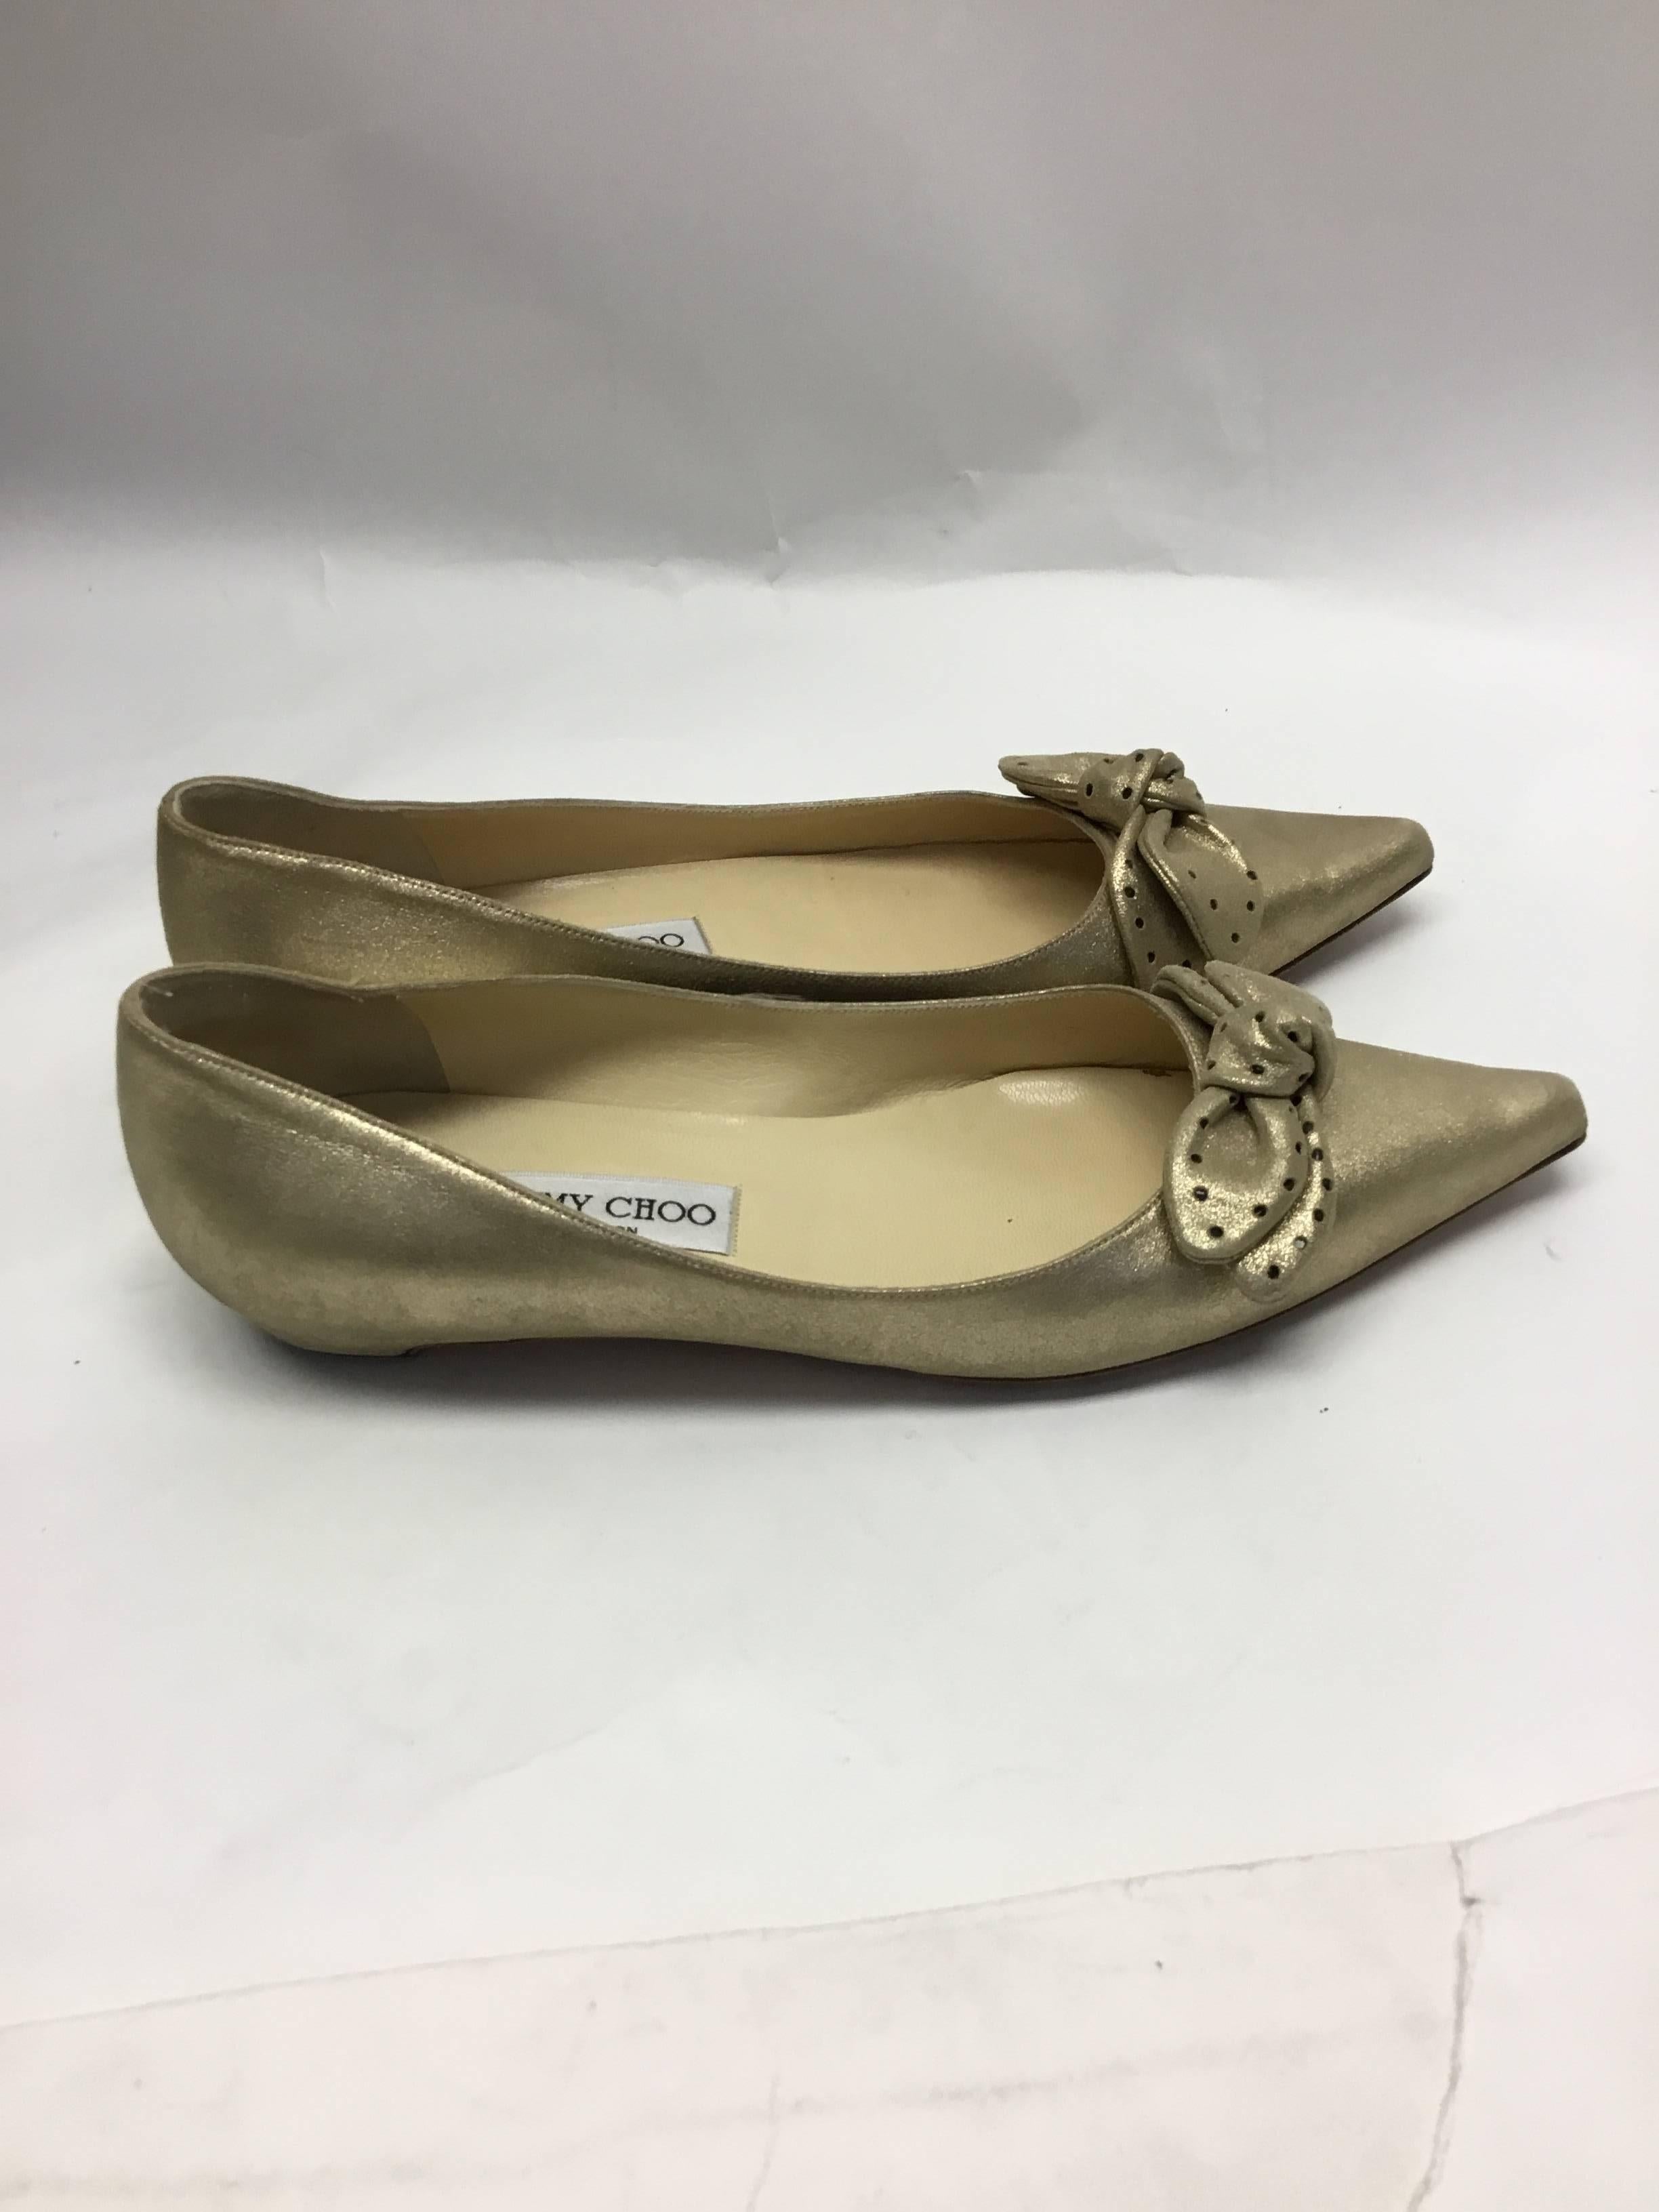 Jimmy Choo Gold Bow Flats
Size 39
Made in Italy
Bow detail 
Gold sheen color